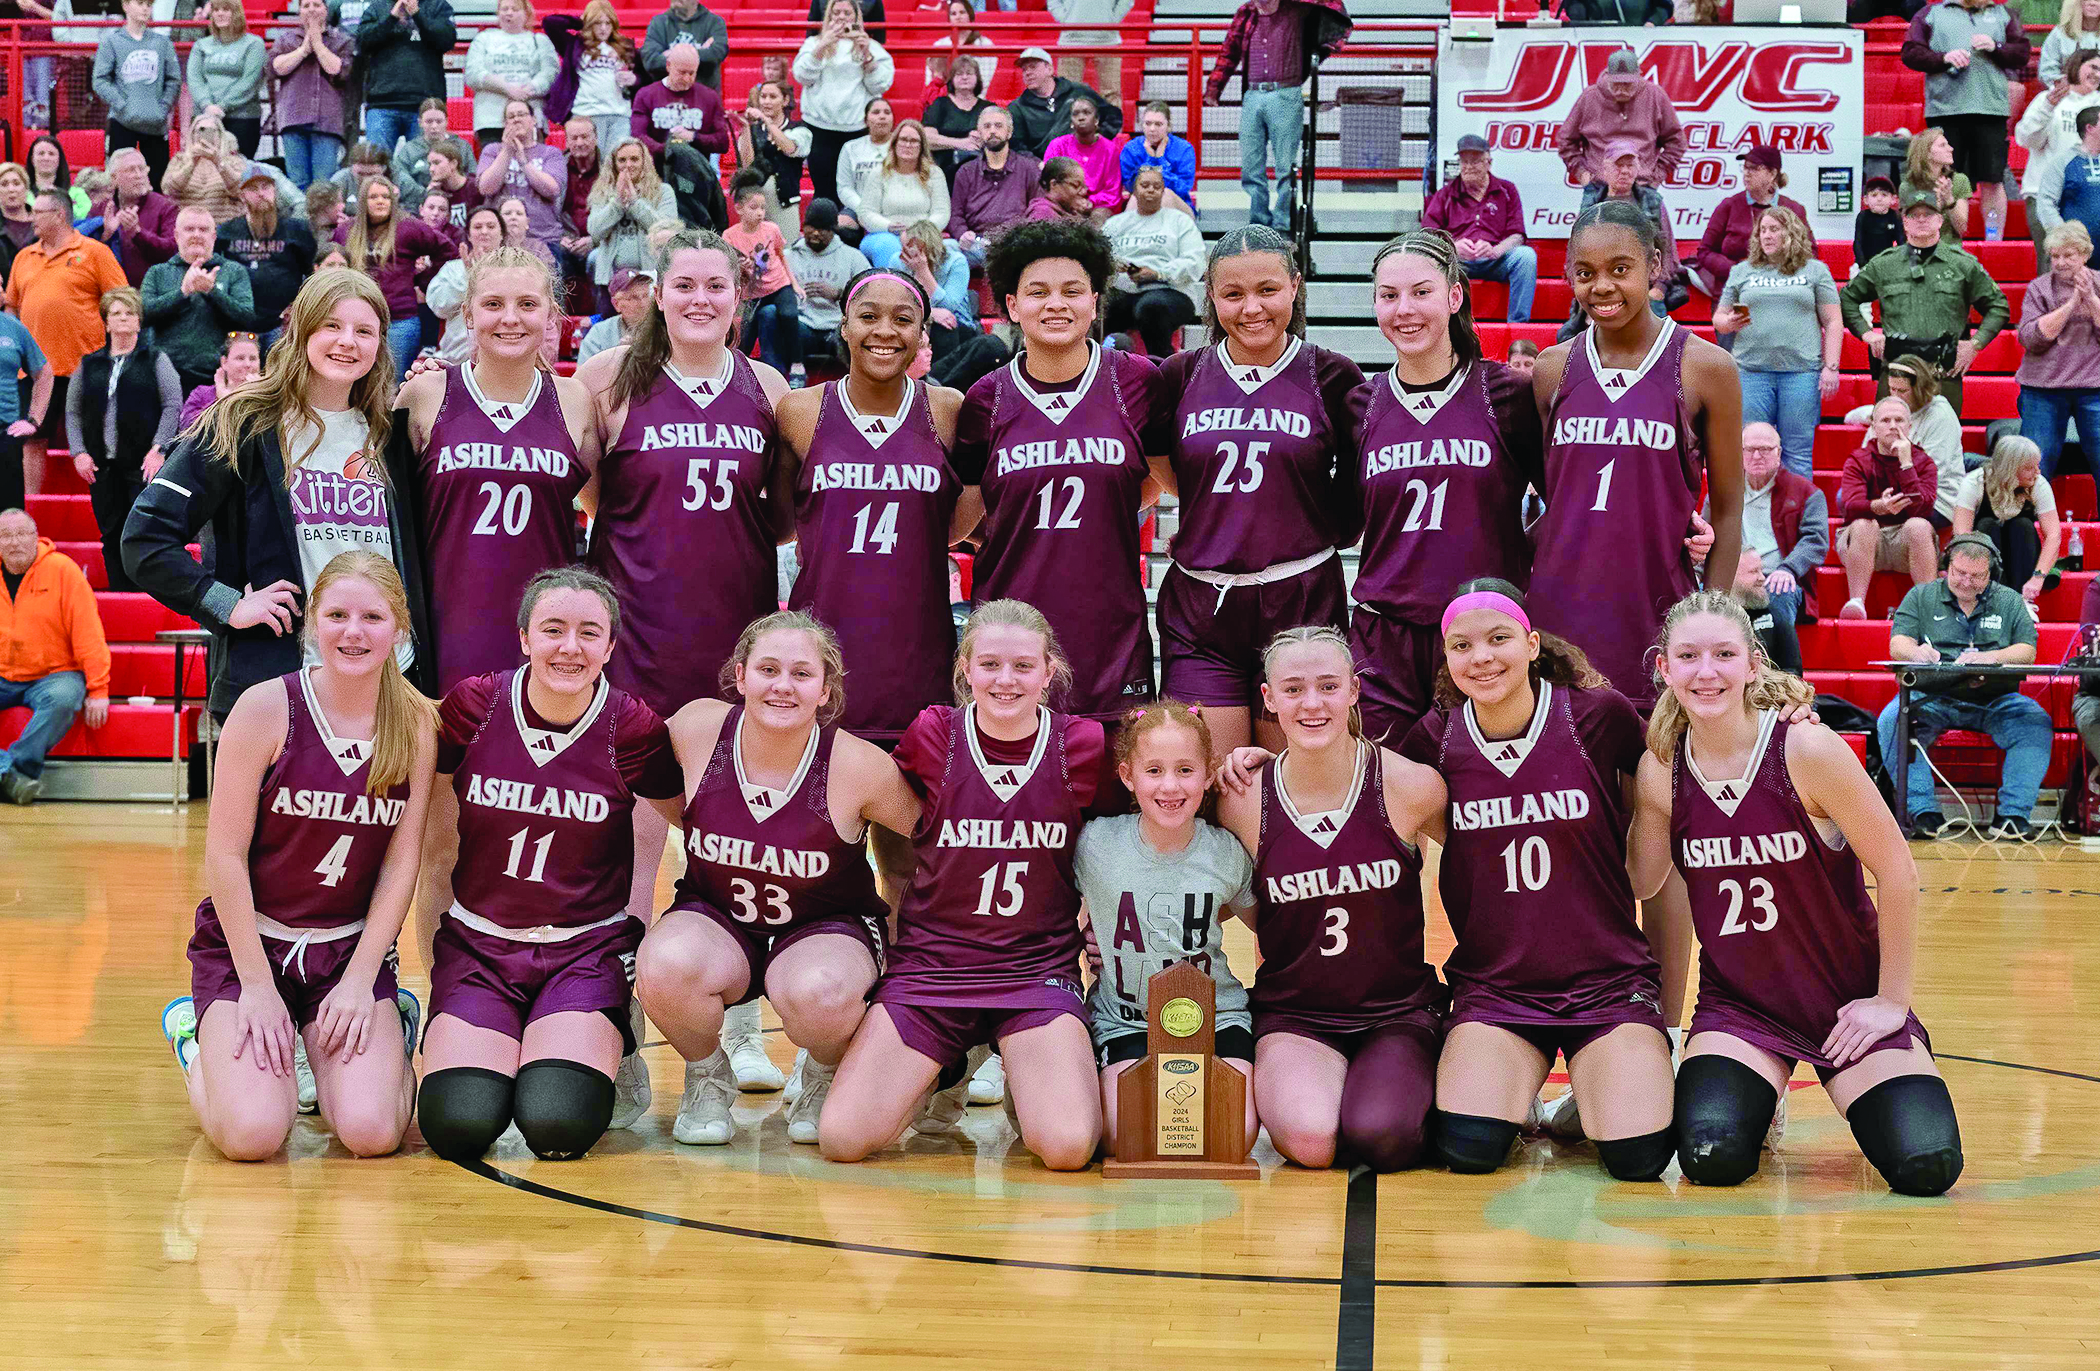 Beacon Ladies Hoops: Ashland, Russell District Champions